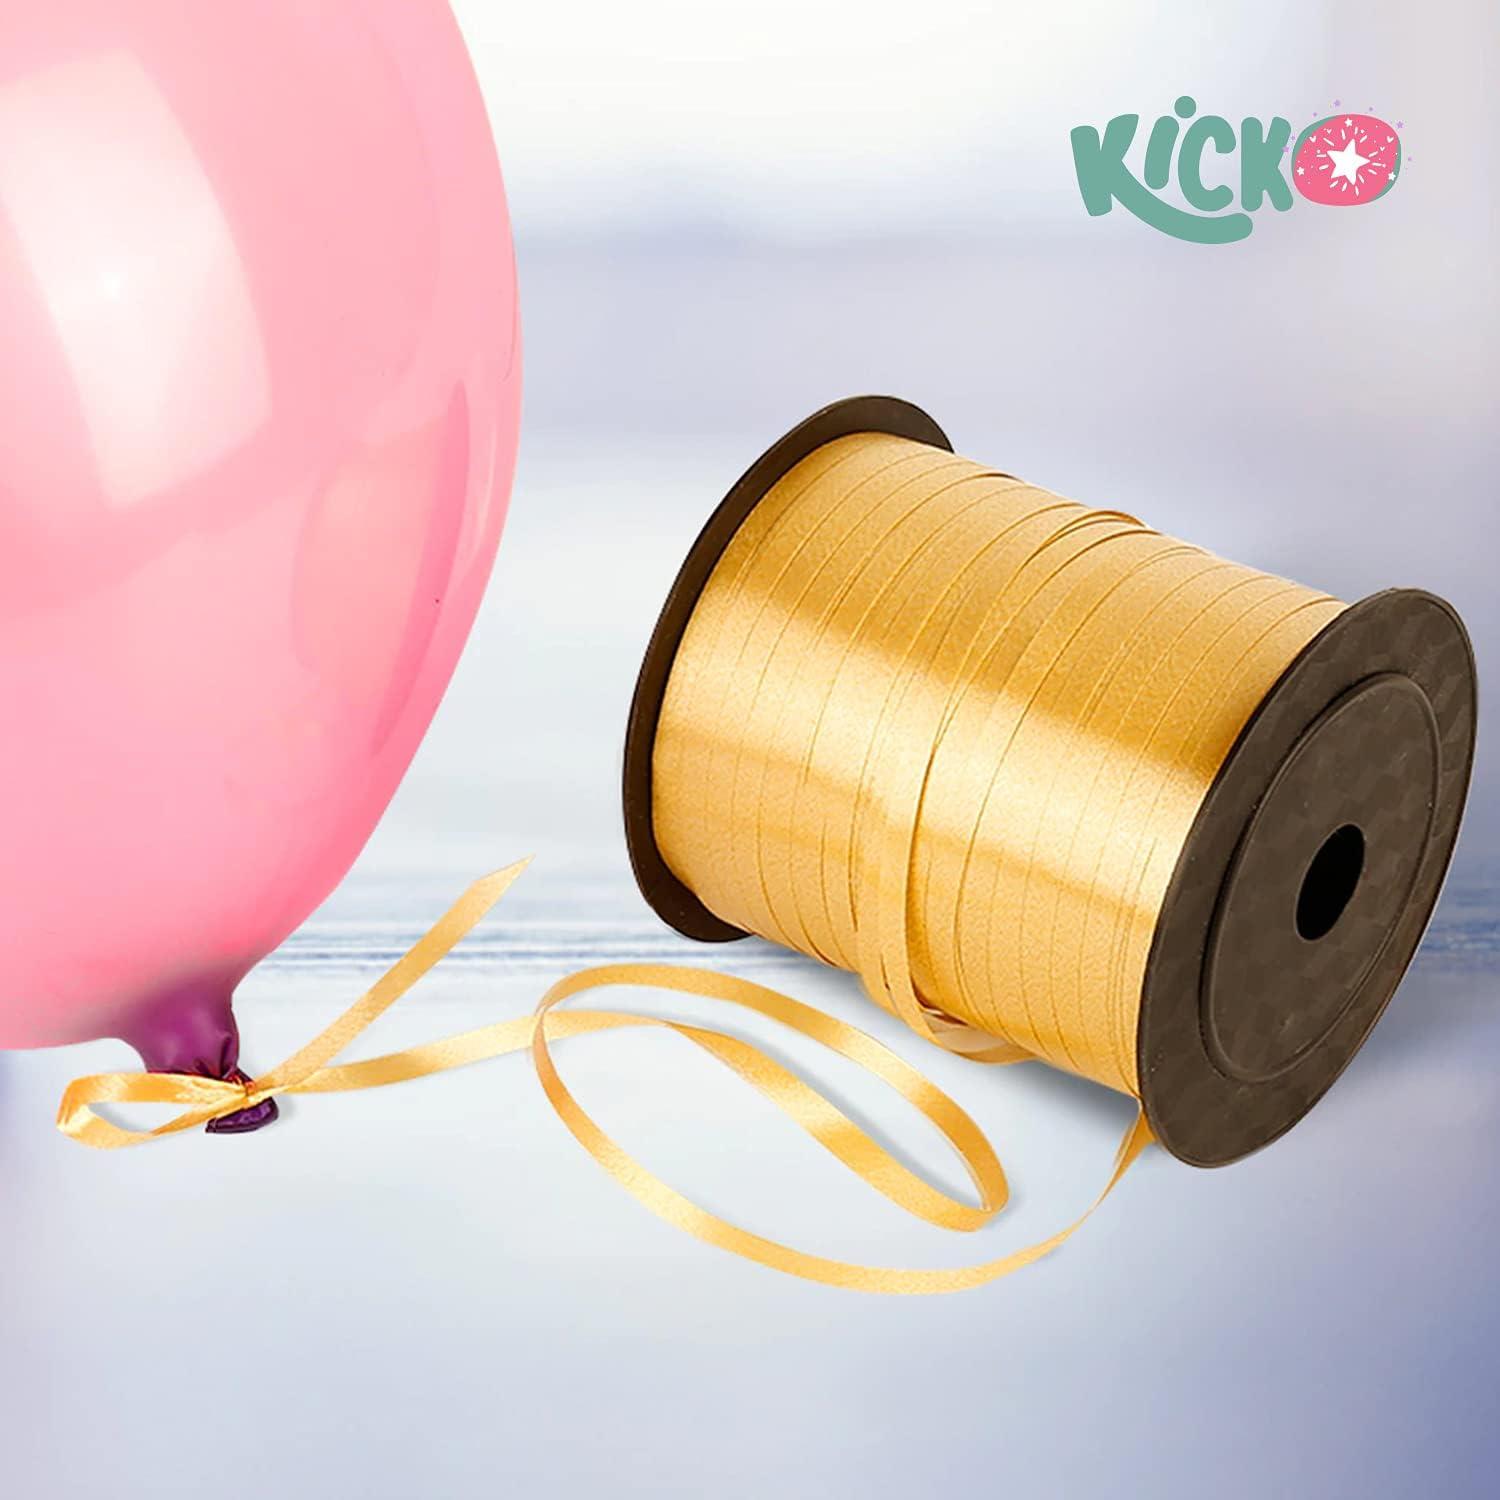 Primary Pre-cut Curling Ribbon - Balloon Ribbons & Weights